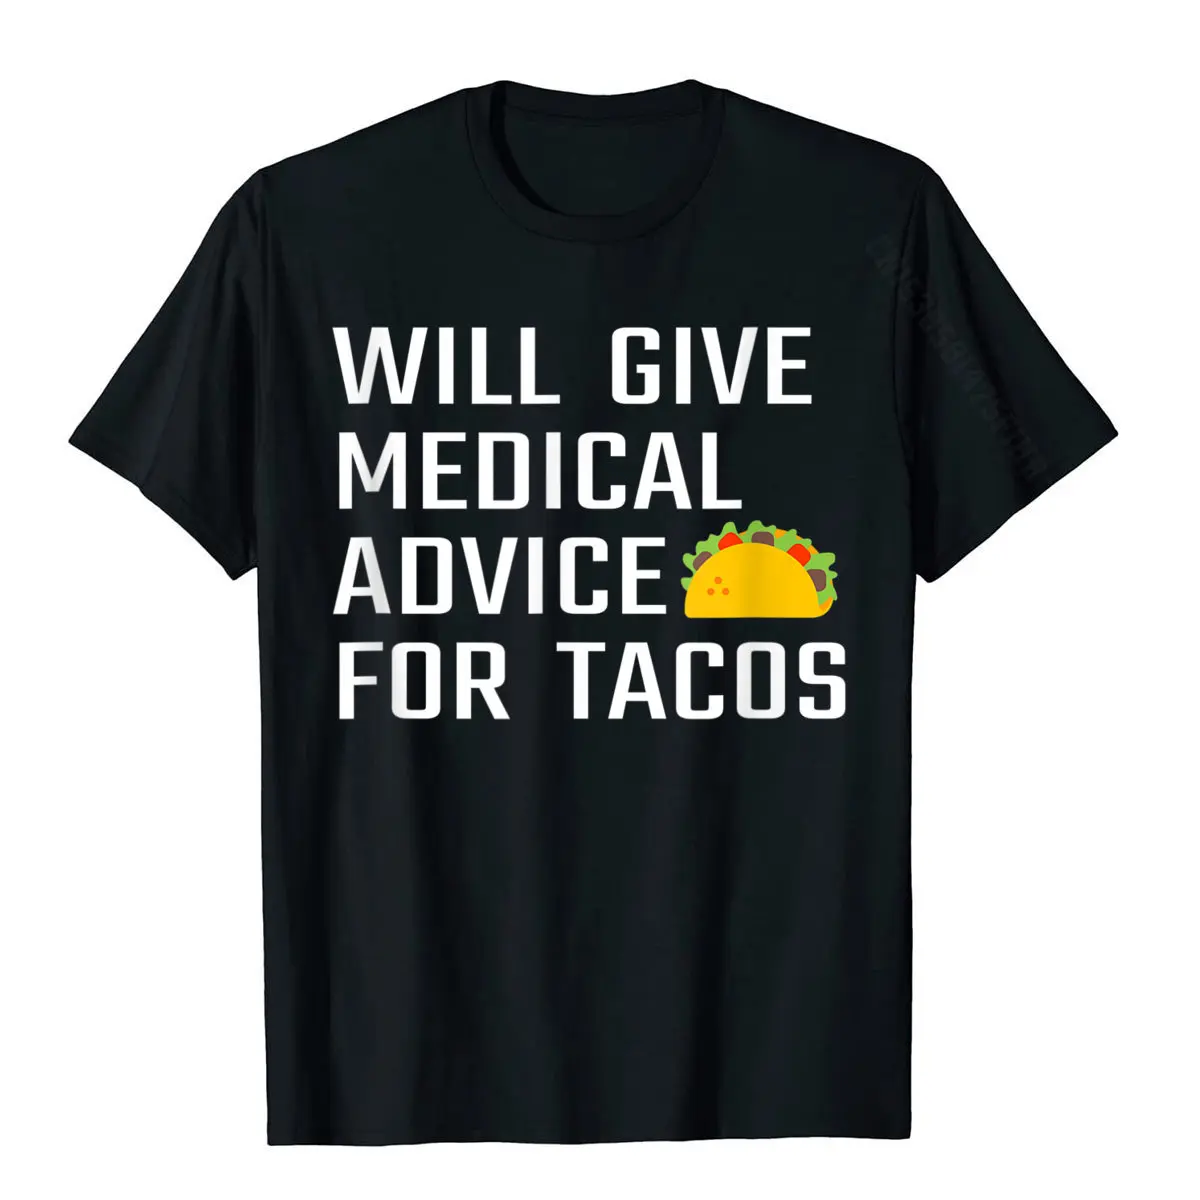 Will Give Medical Advice For Tacos Funny Doctor Nurse Medic T-Shirt Tops Shirt Designer Classic Cotton Mens Tshirts Street